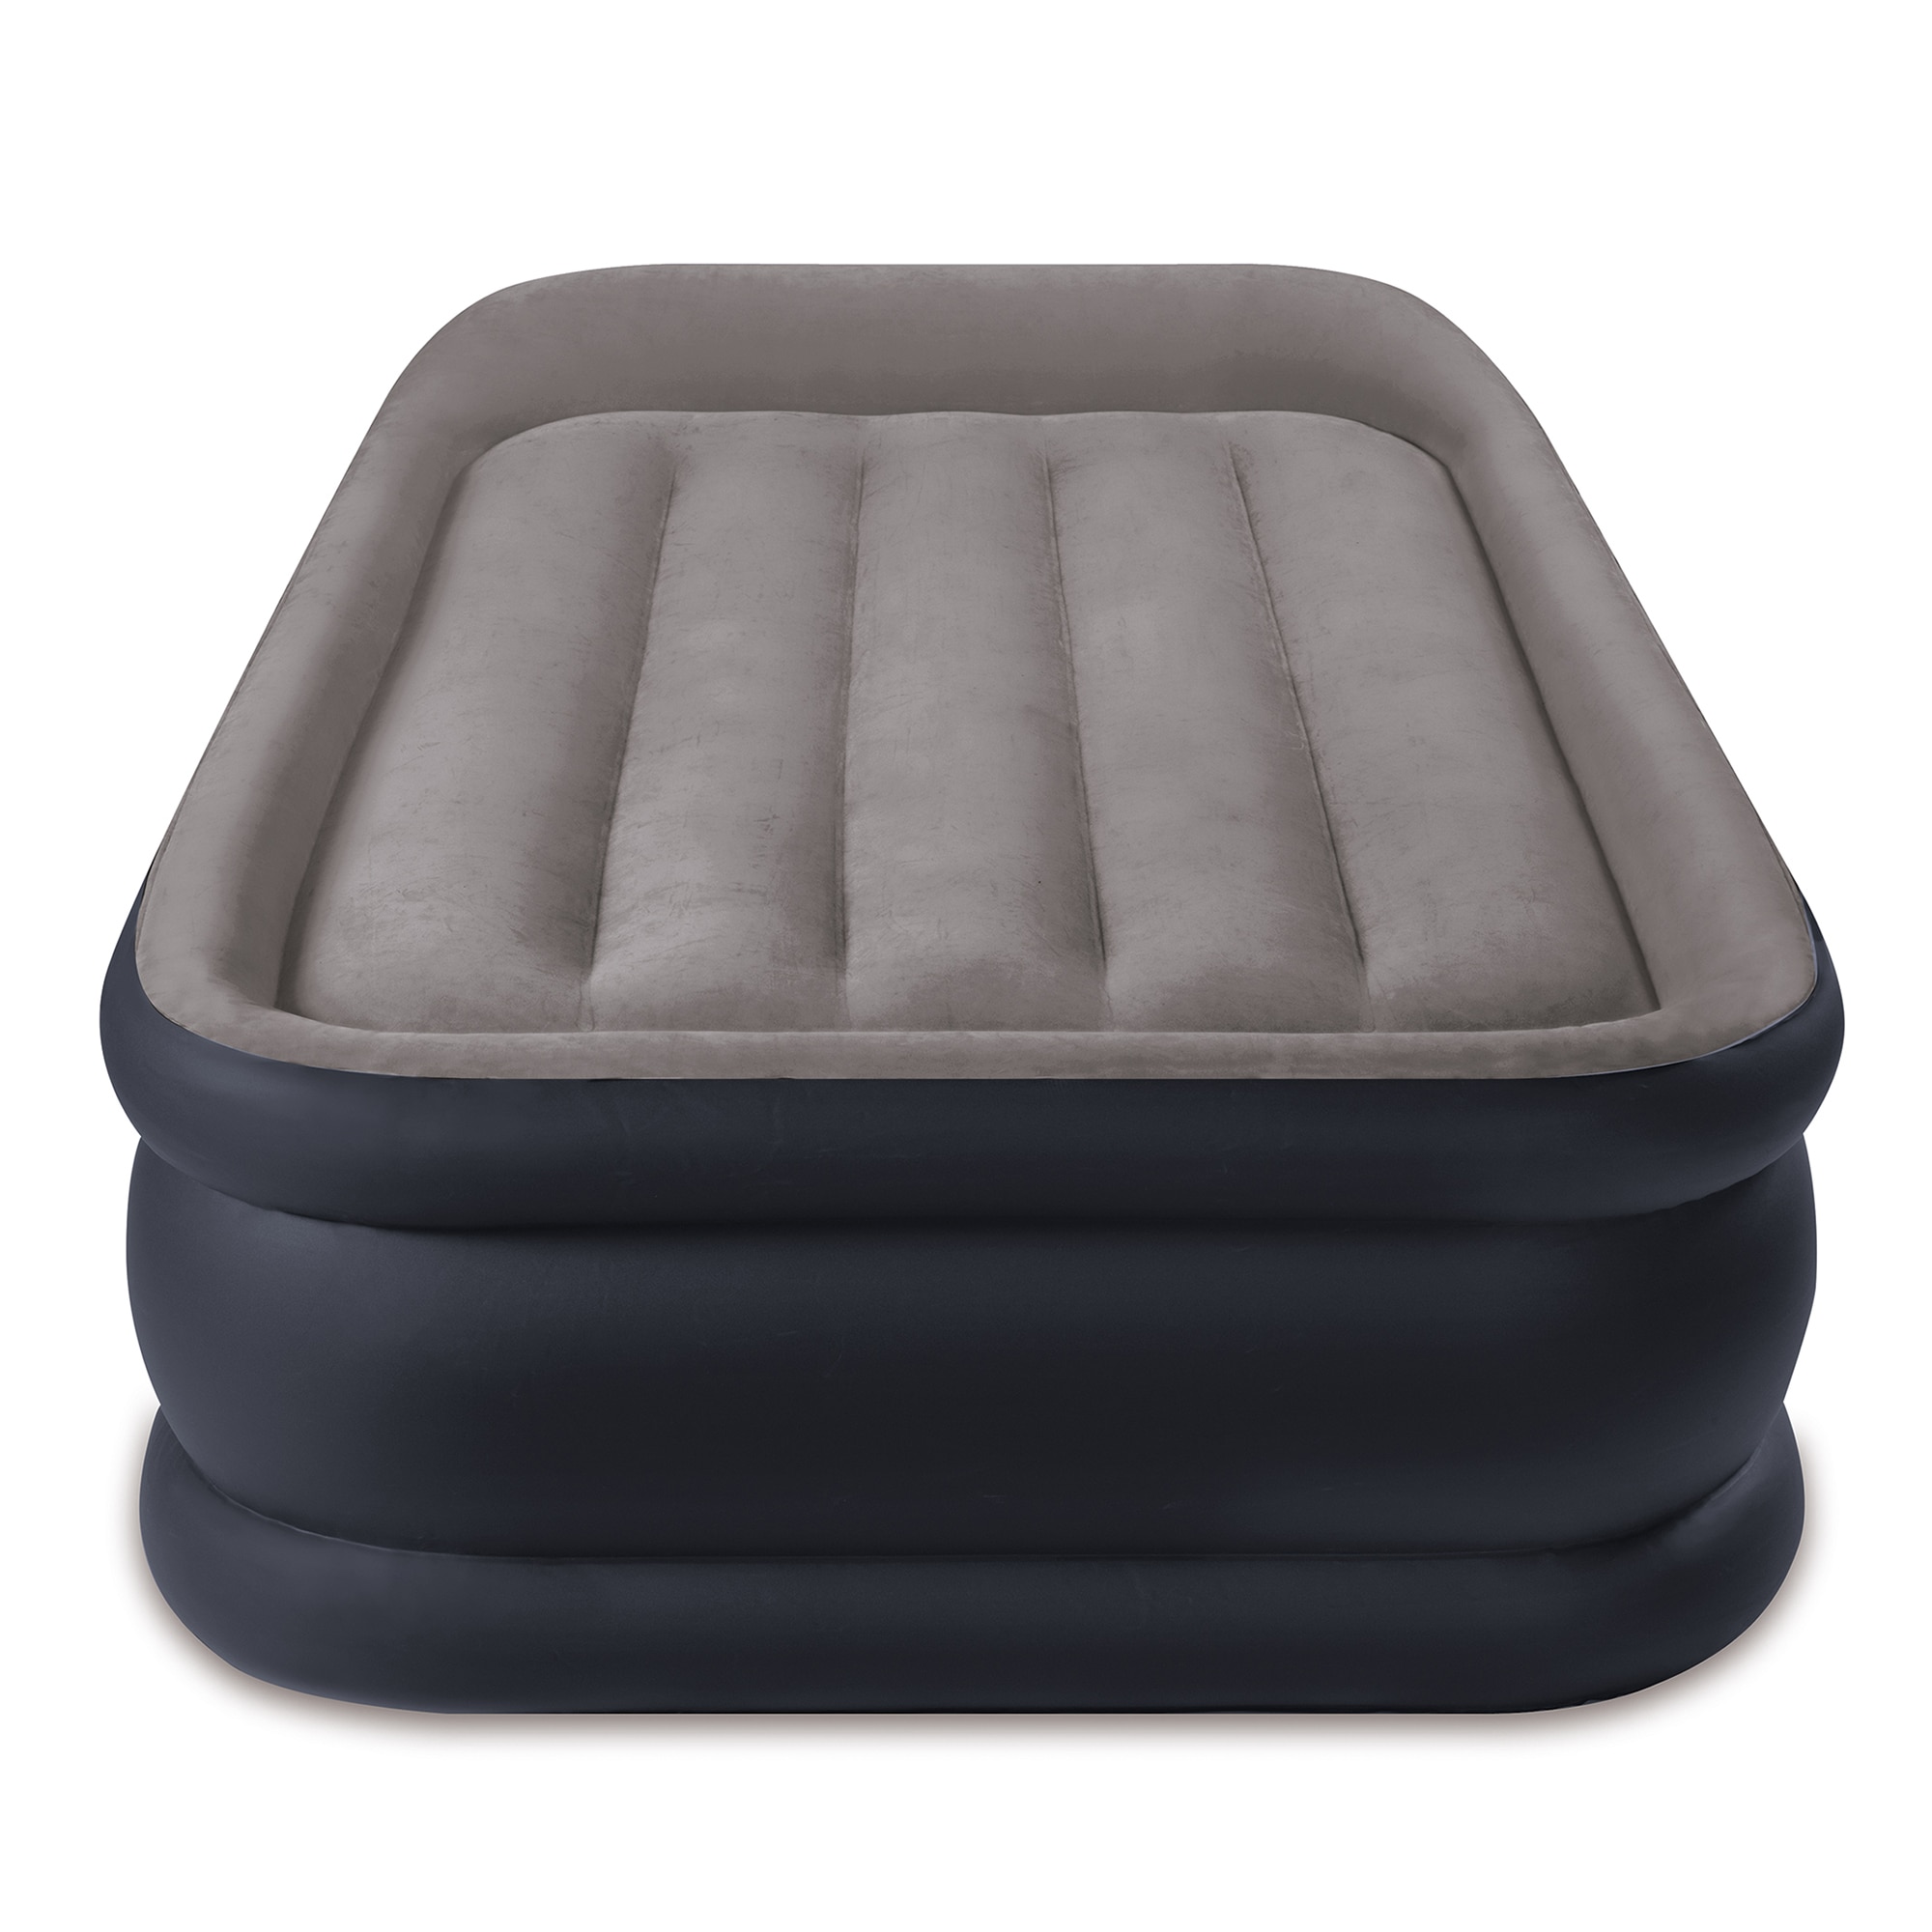 Intex Dura Beam Standard Deluxe Pillow Rest Raised Airbed w/ Built in Pump Twin 